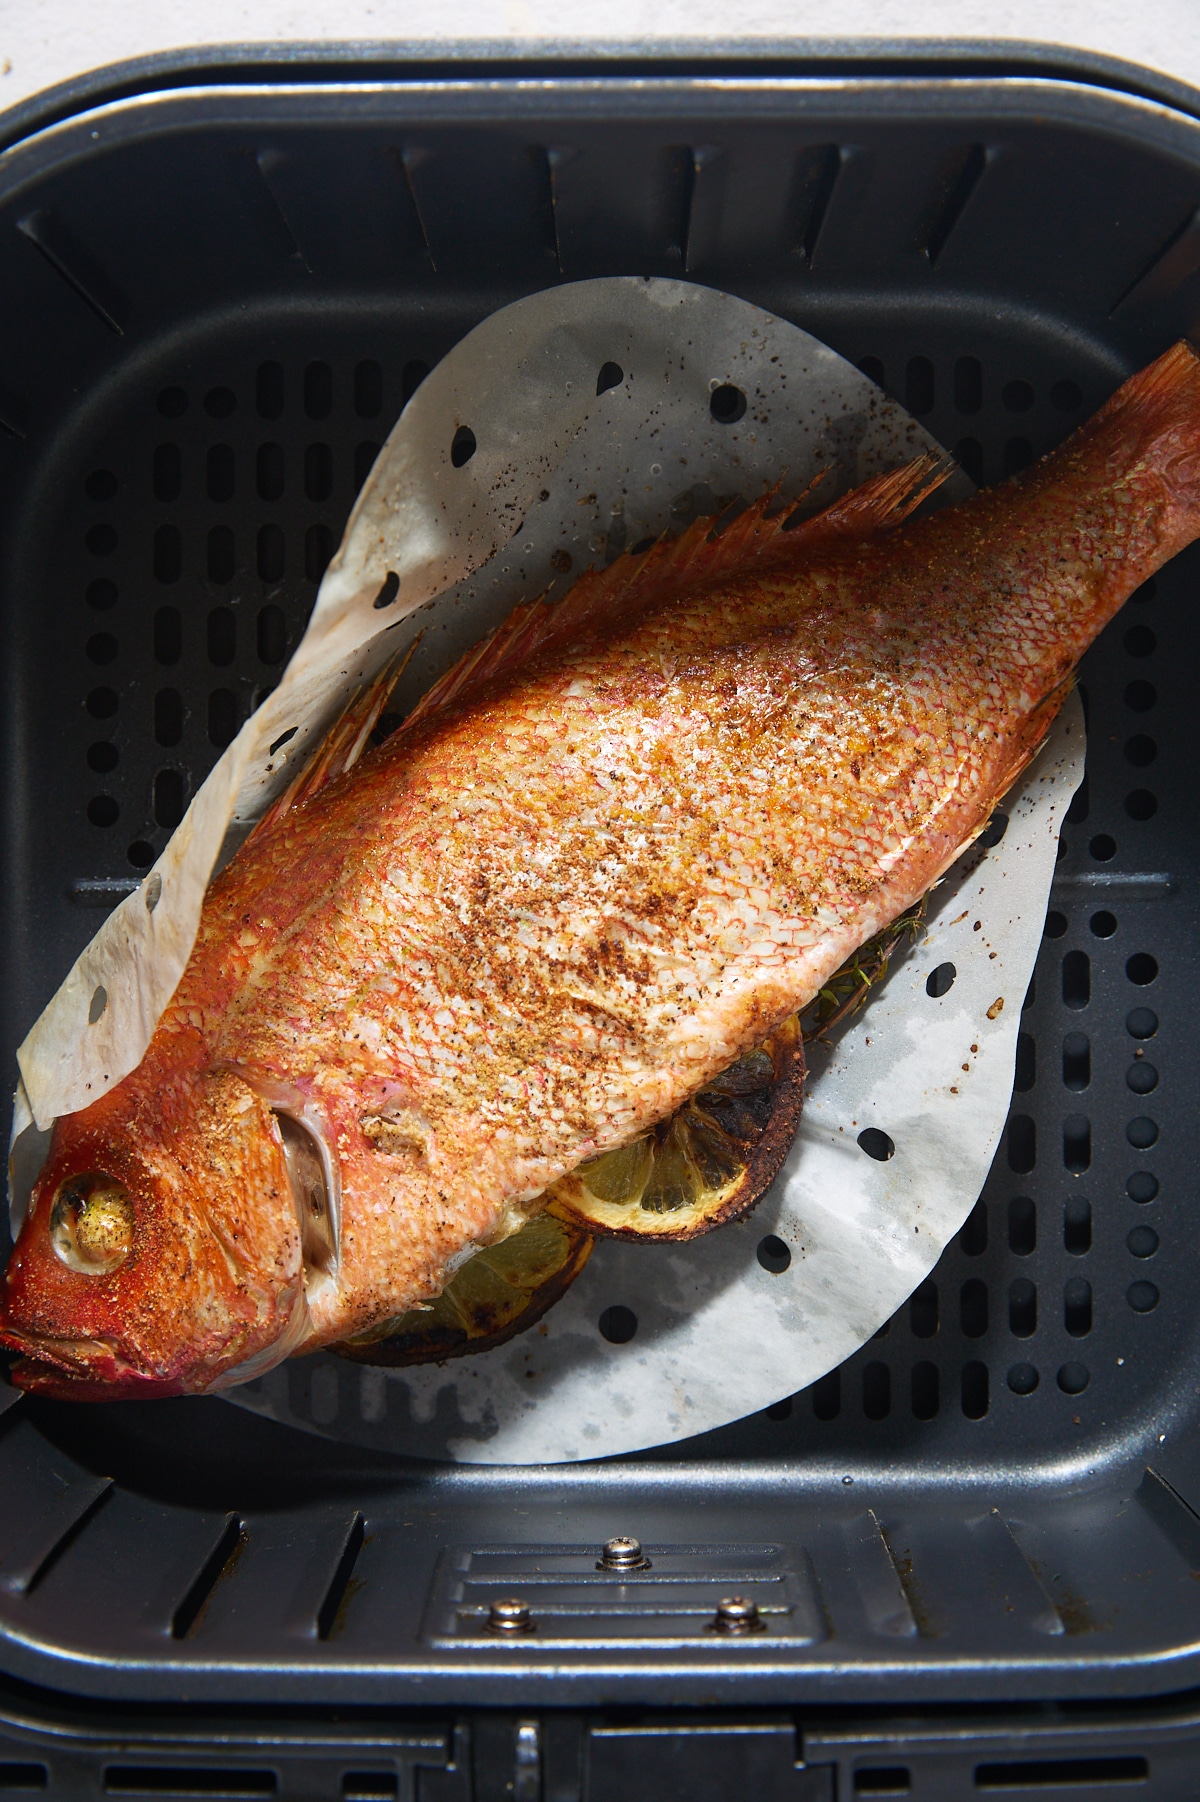 How to clean and fillet a whole fish at home for the freshest